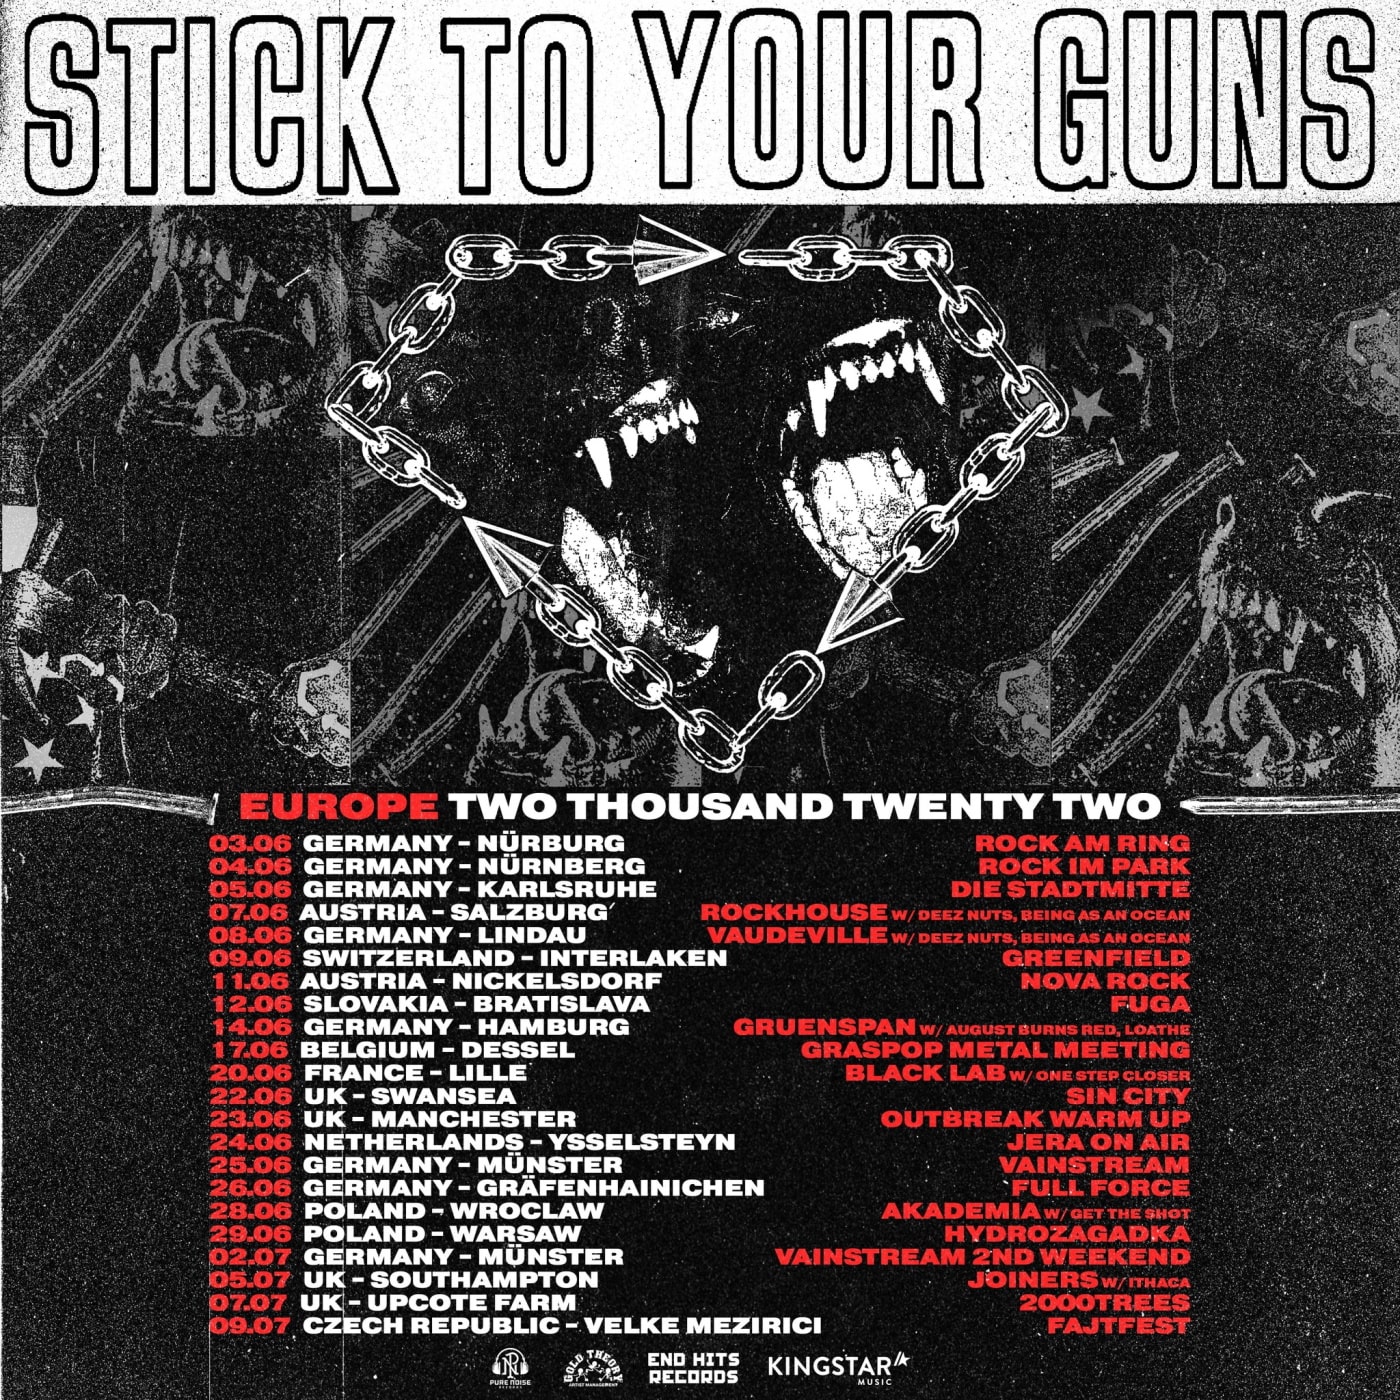 STICK TO YOUR GUNS